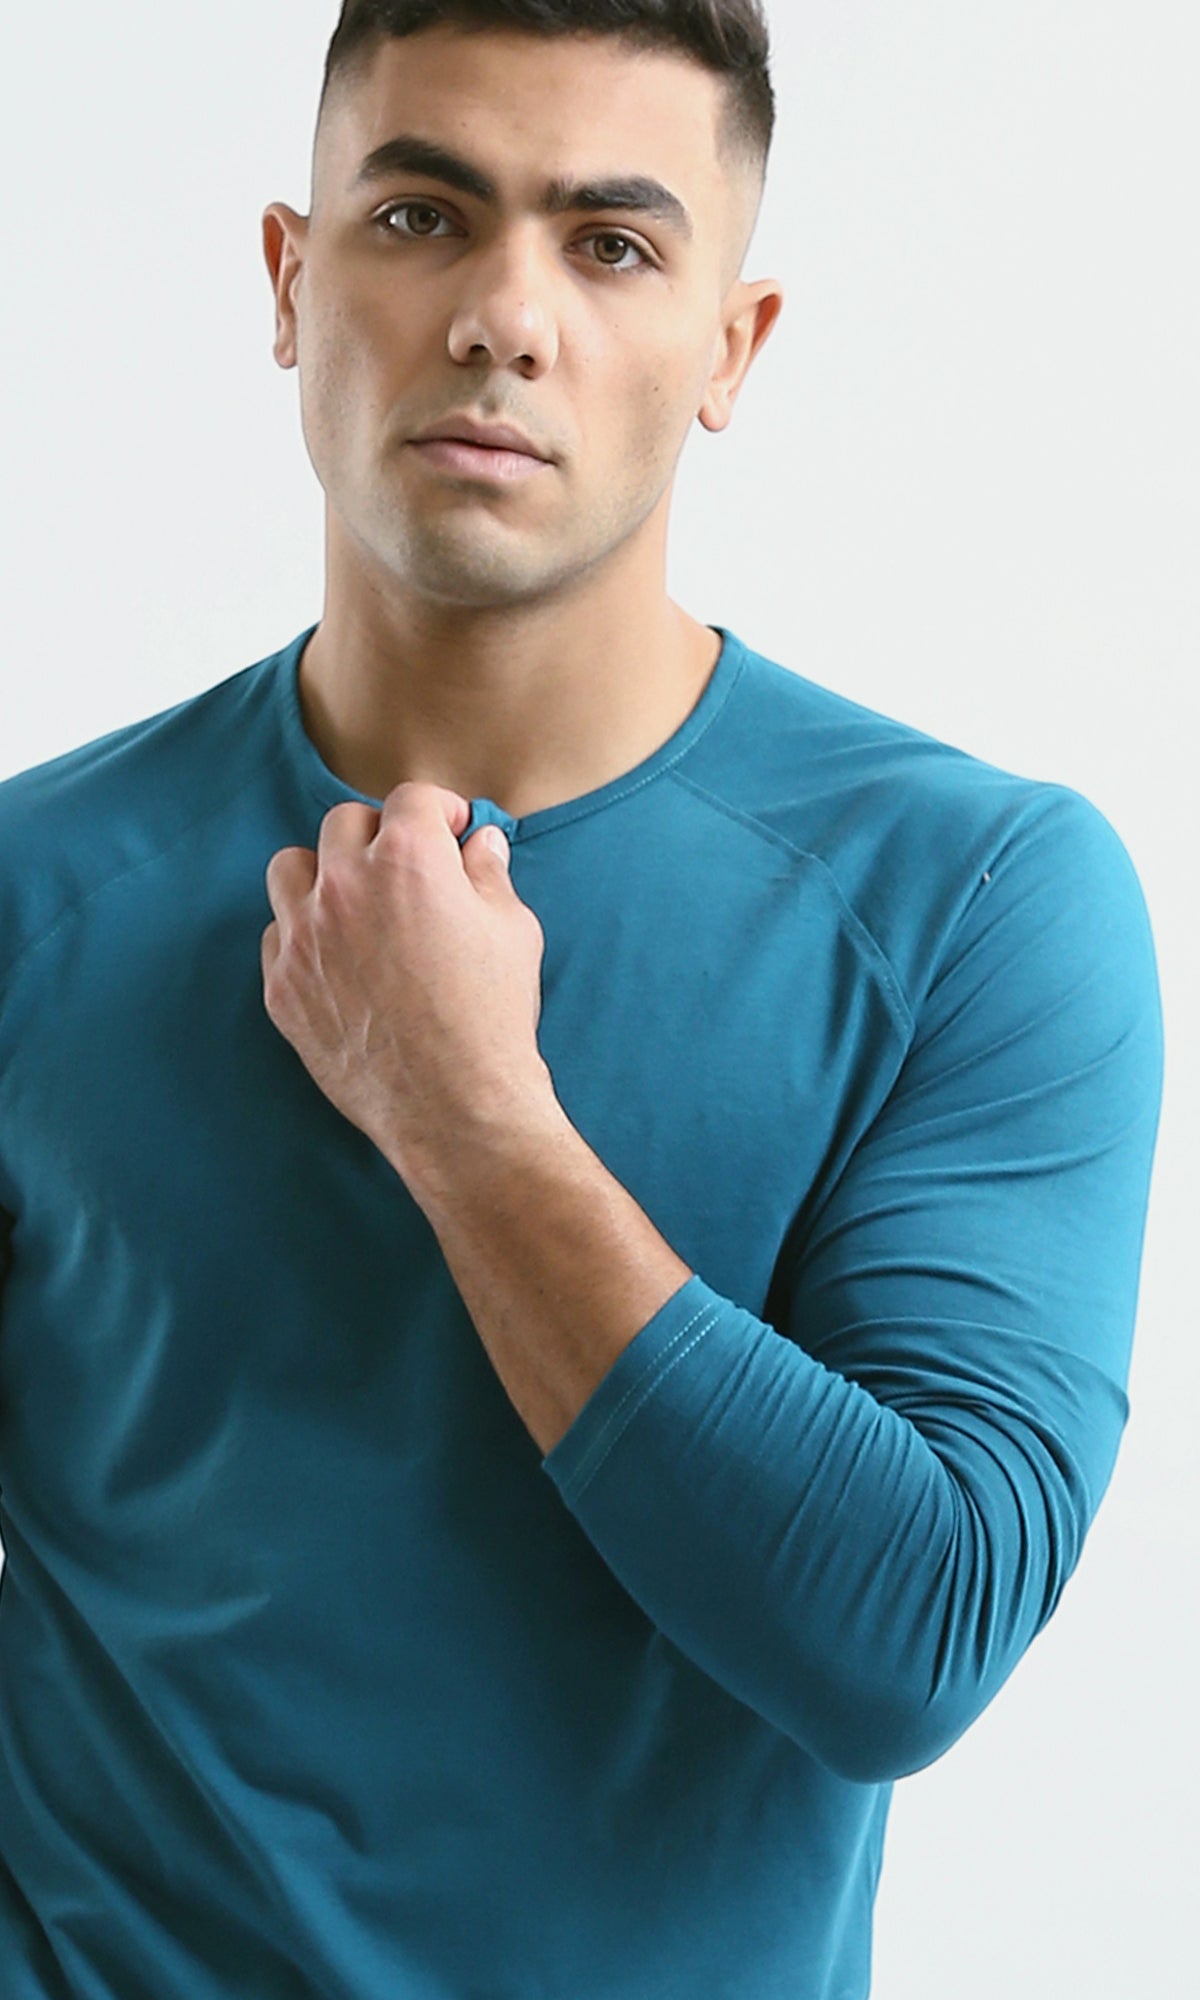 O188540 Petroleum Solid Henley Shirt With Buttoned Neck